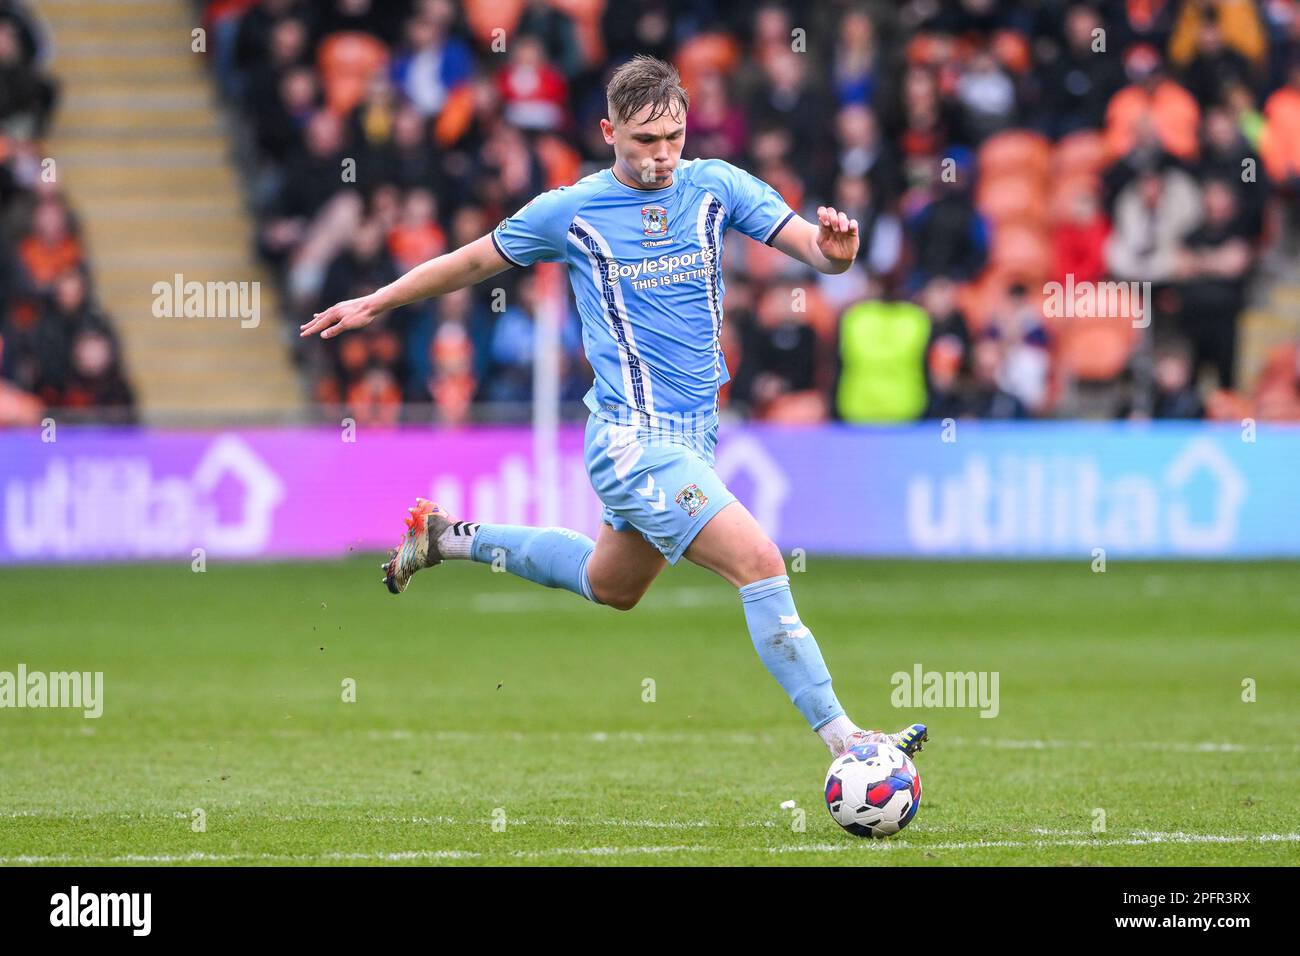 Callum Doyle #3 of Coventry City makes a break with the ball  during the Sky Bet Championship match Blackpool vs Coventry City at Bloomfield Road, Blackpool, United Kingdom, 18th March 2023  (Photo by Craig Thomas/News Images) Stock Photo